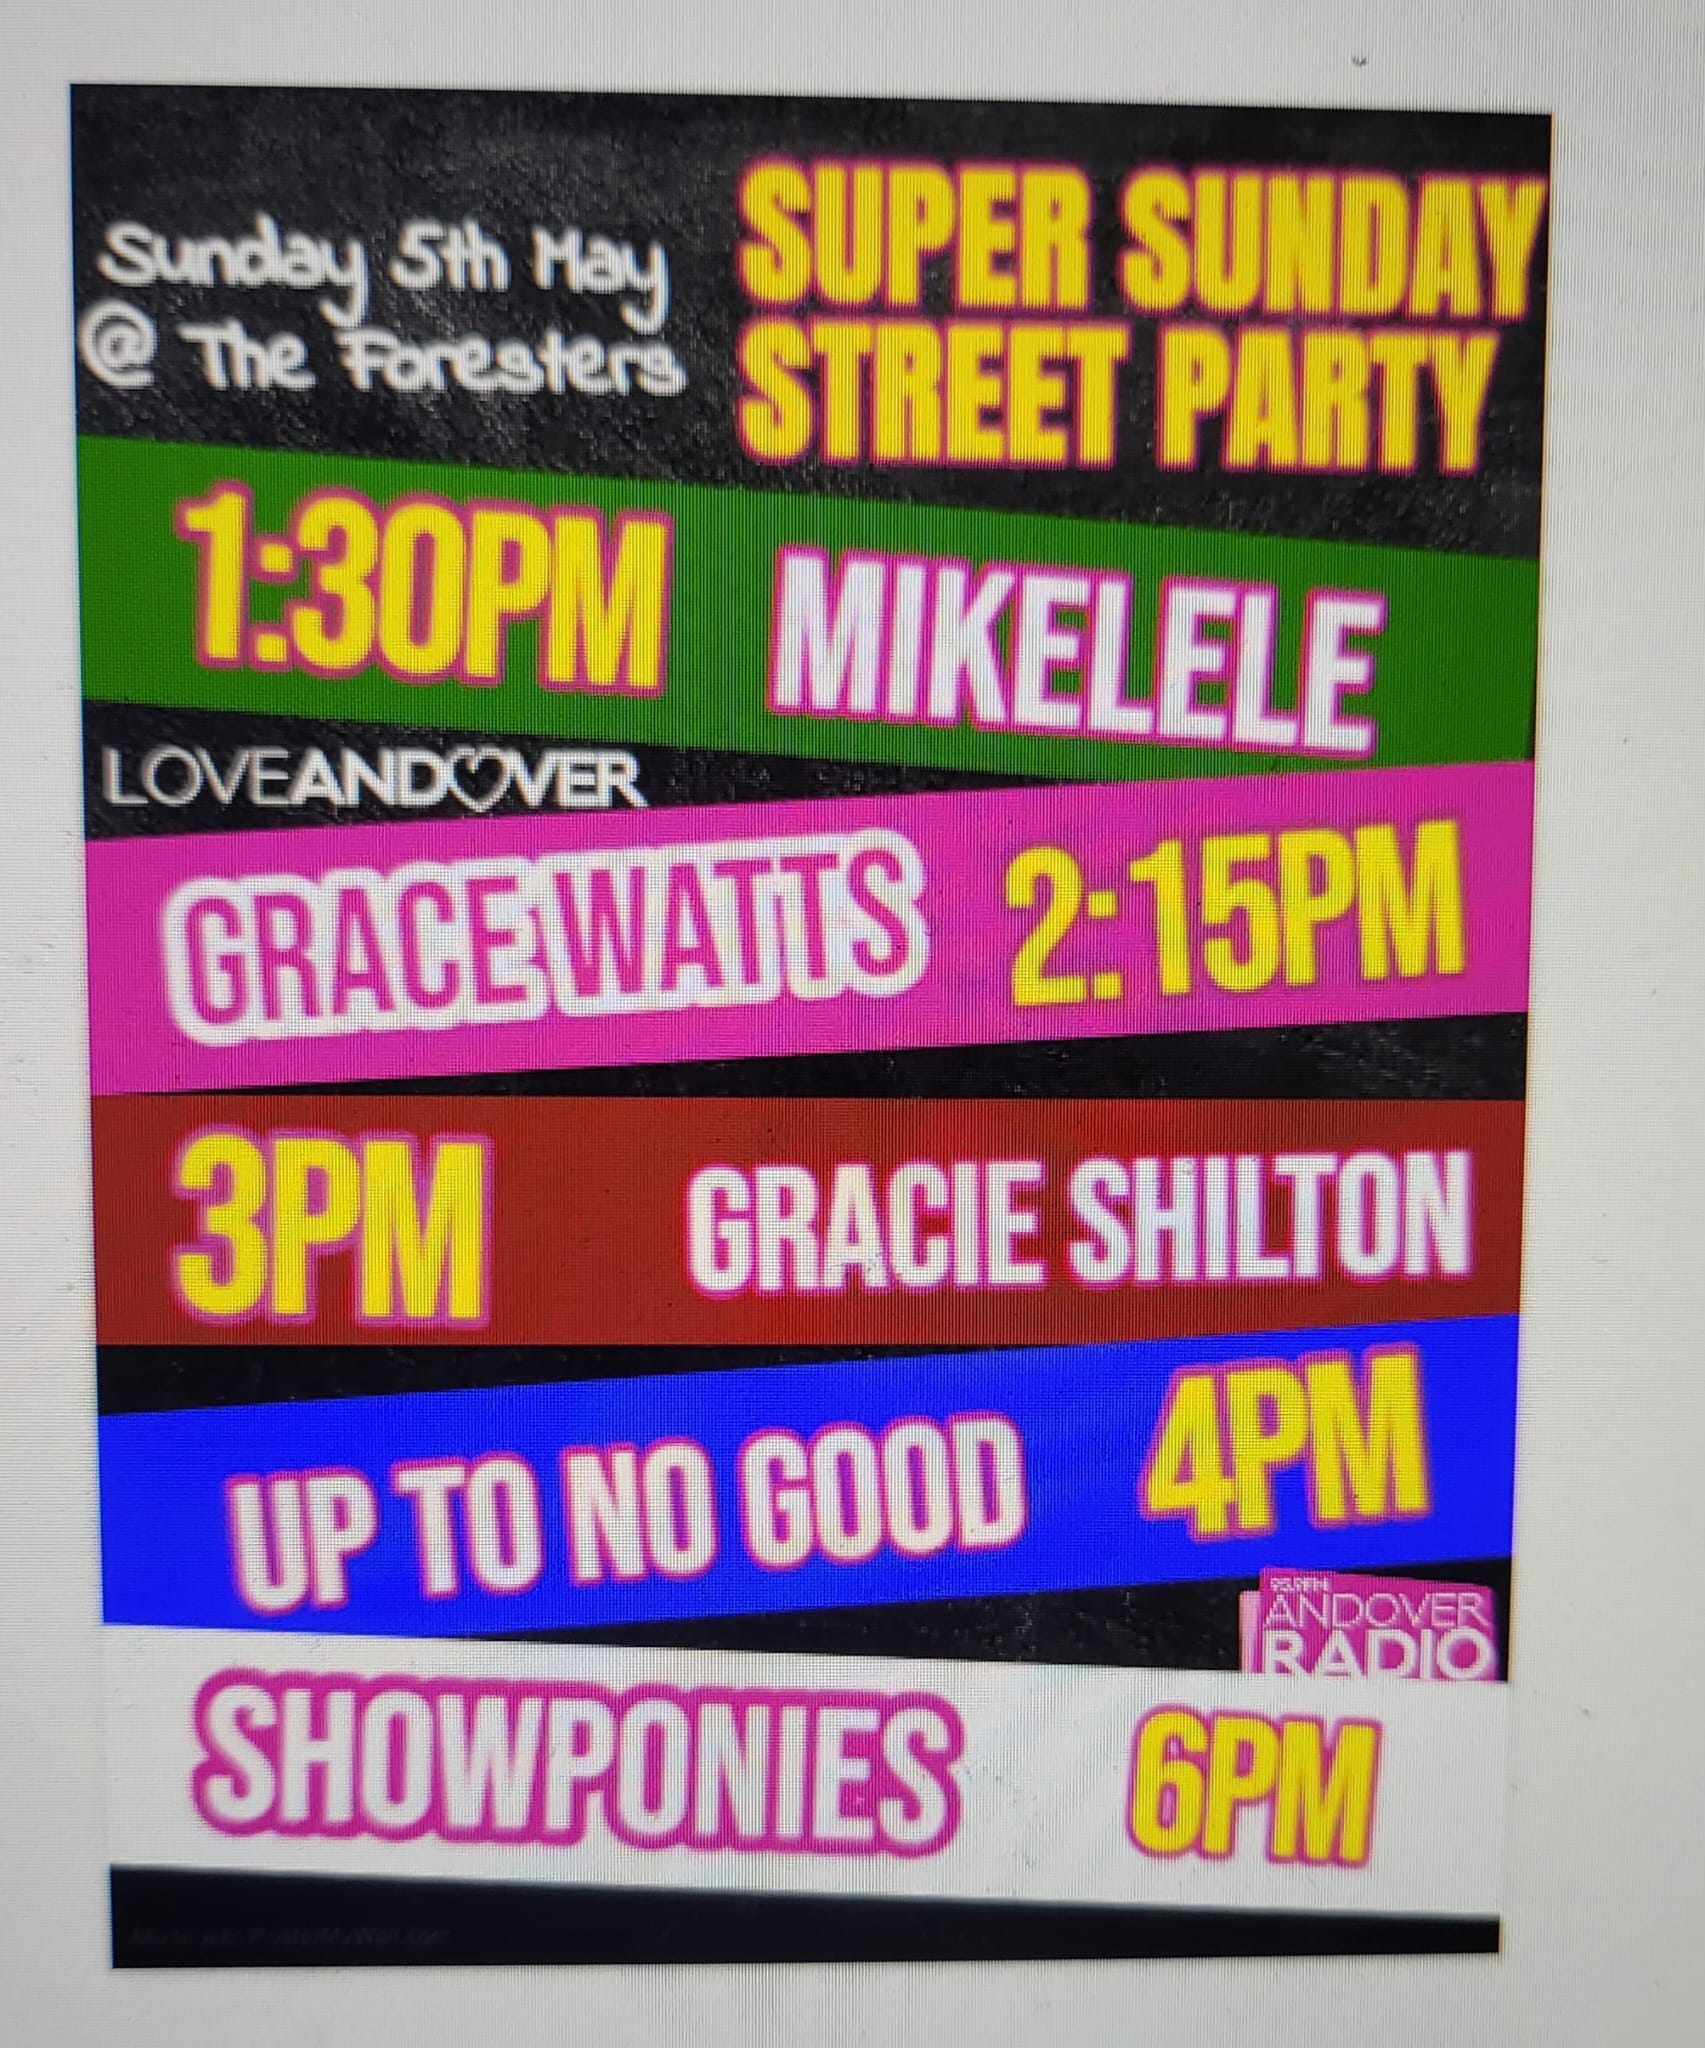 Street Party and Music Festival: Mikelele + Grace Watts + Gracie Shilton + Up To No Good + Showponies